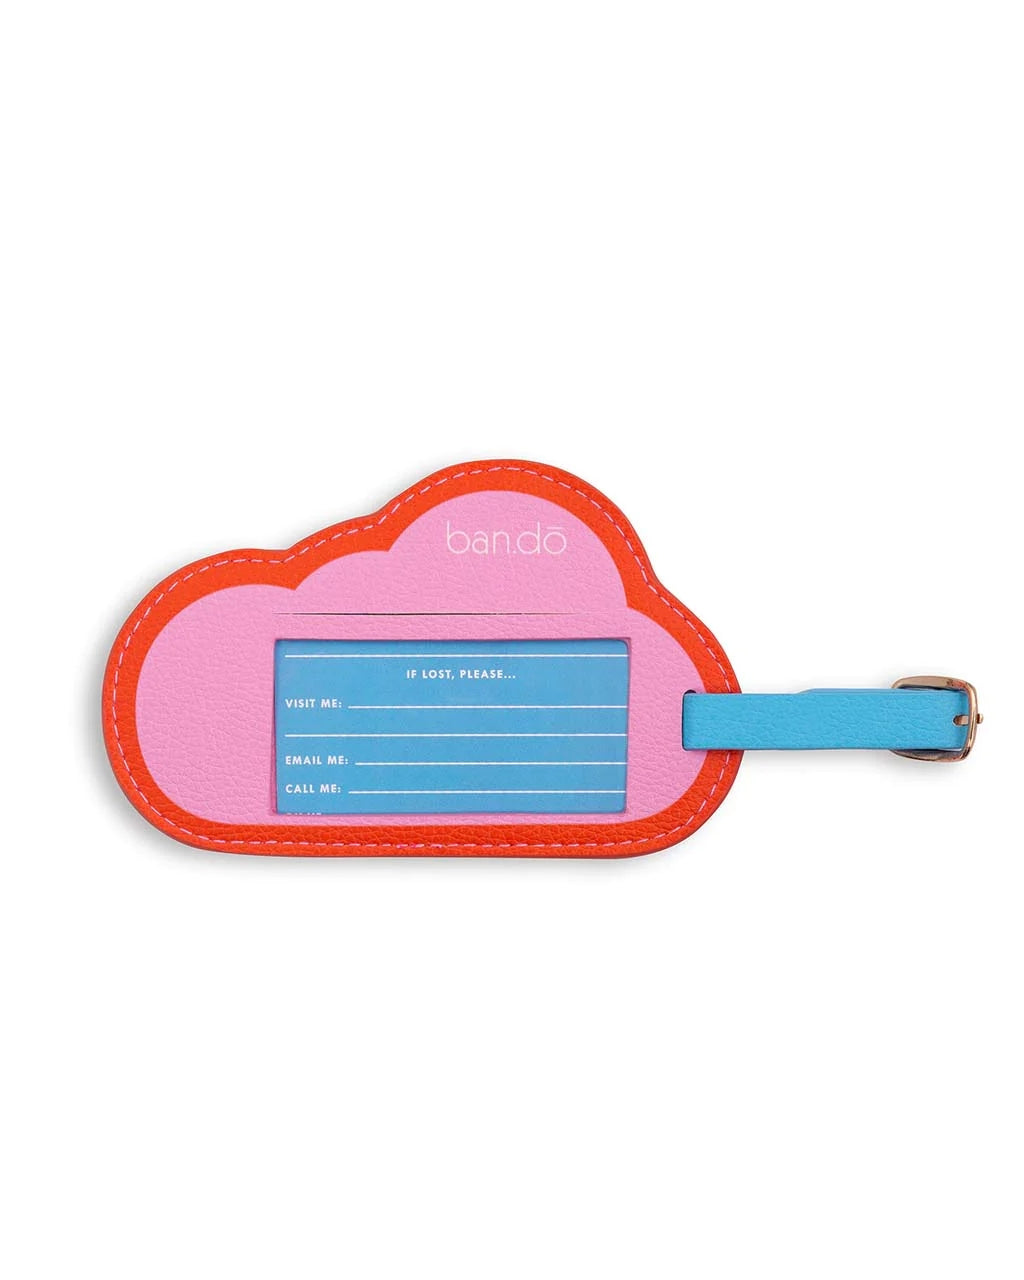 The Getaway Luggage Tag - Head In The Cloud [PRE ORDER]